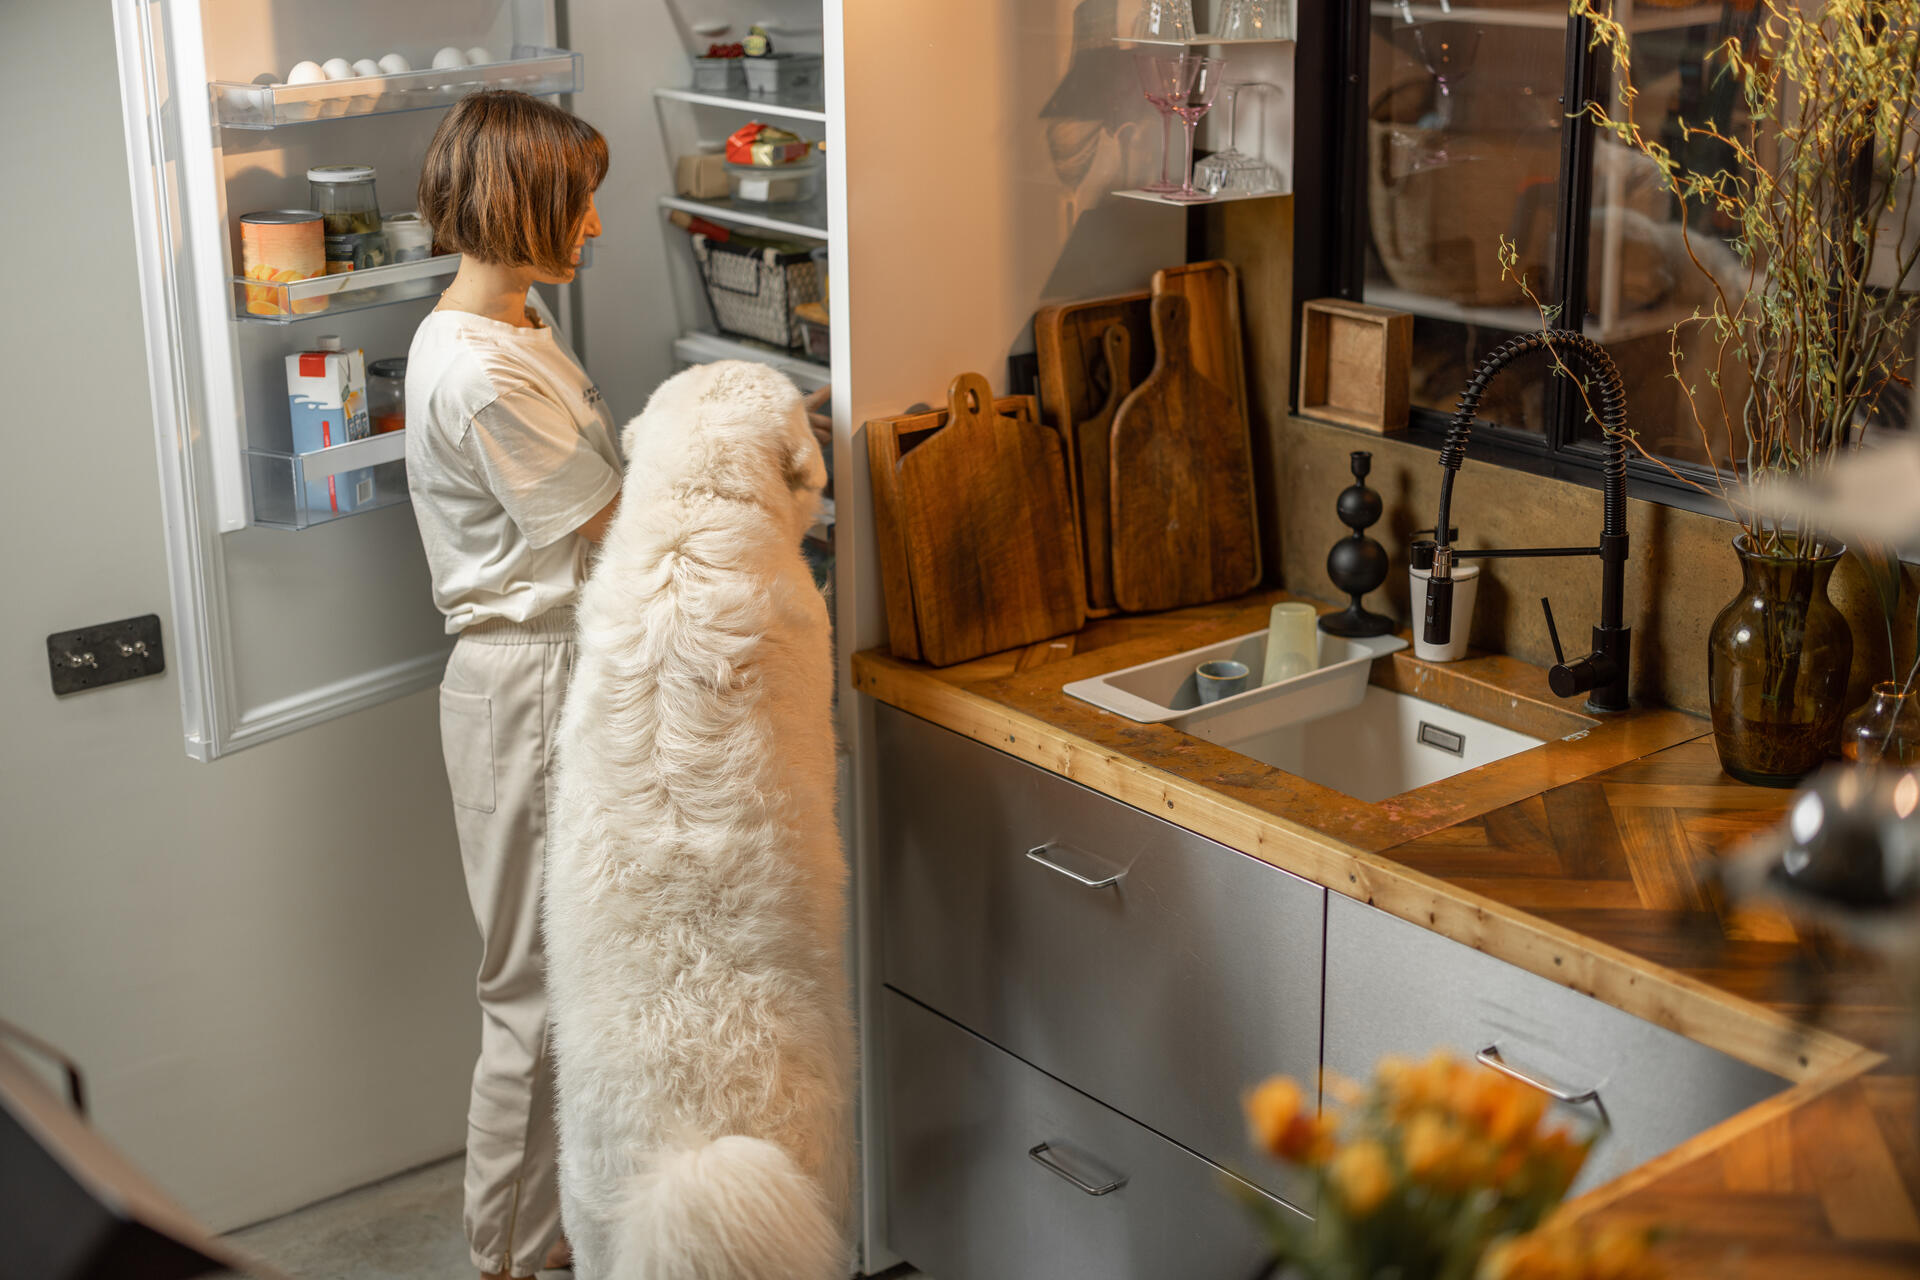 A woman and dog inspecting a fridge